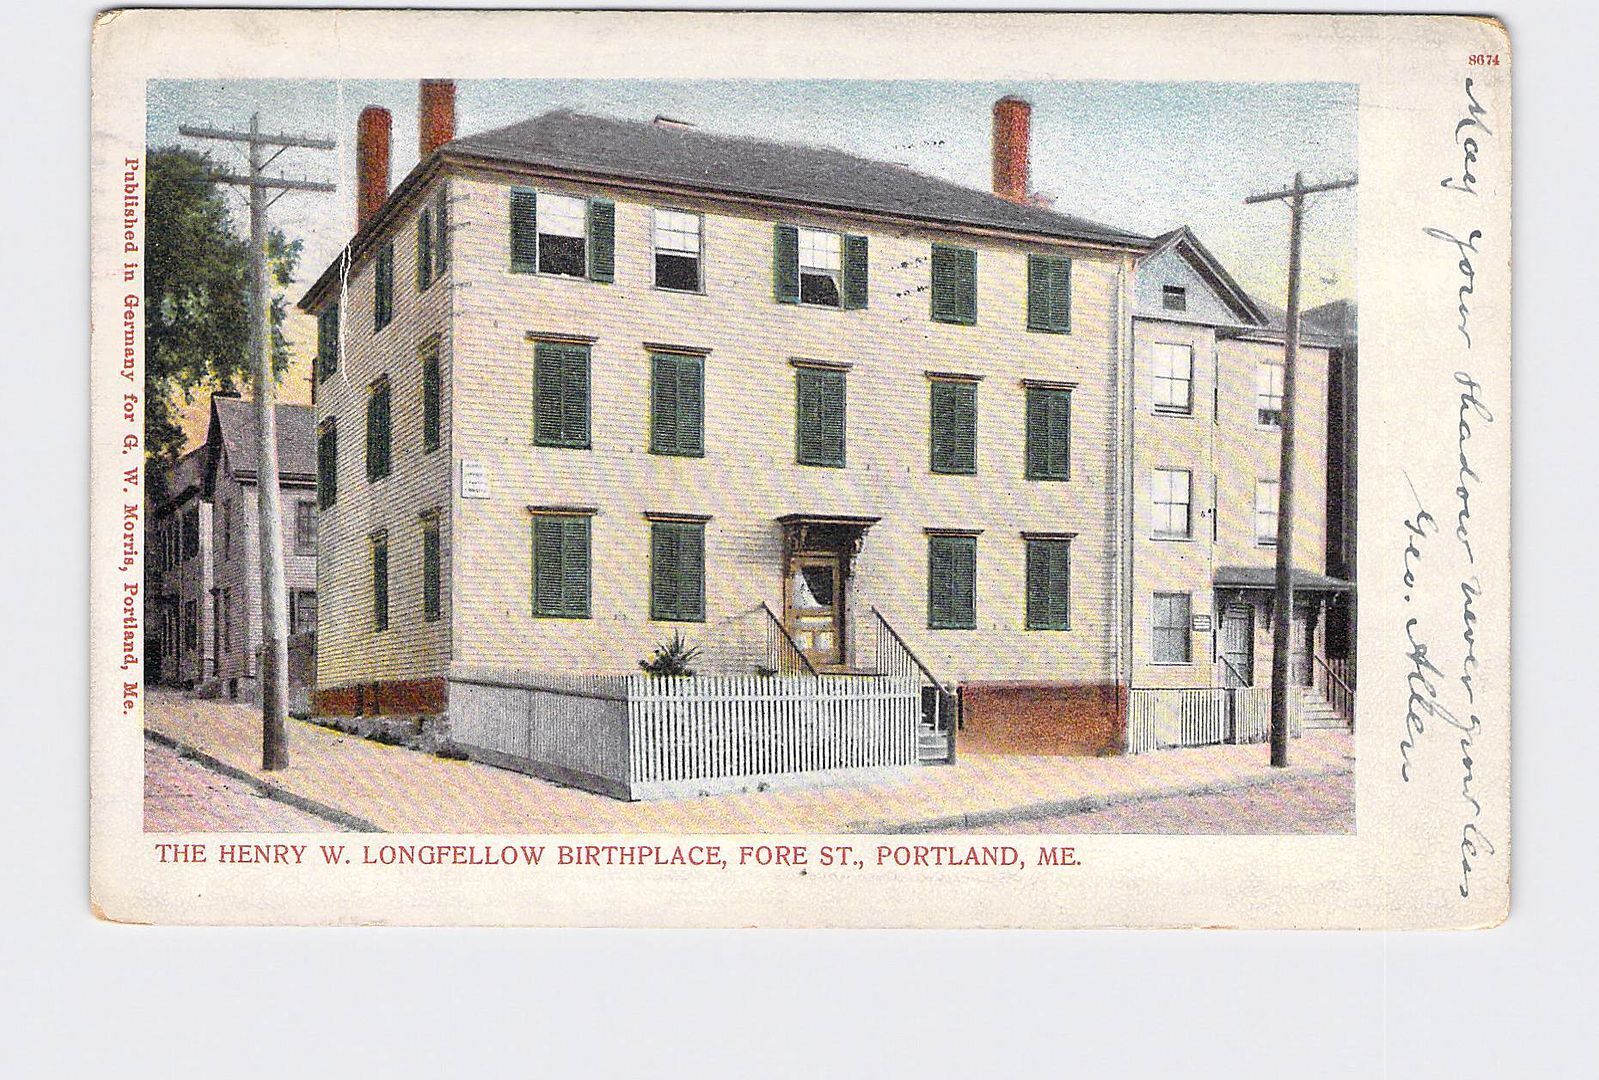 PPC Private Mailing Card ME Maine Portland Henry W Longfellow Birthplace Fore St